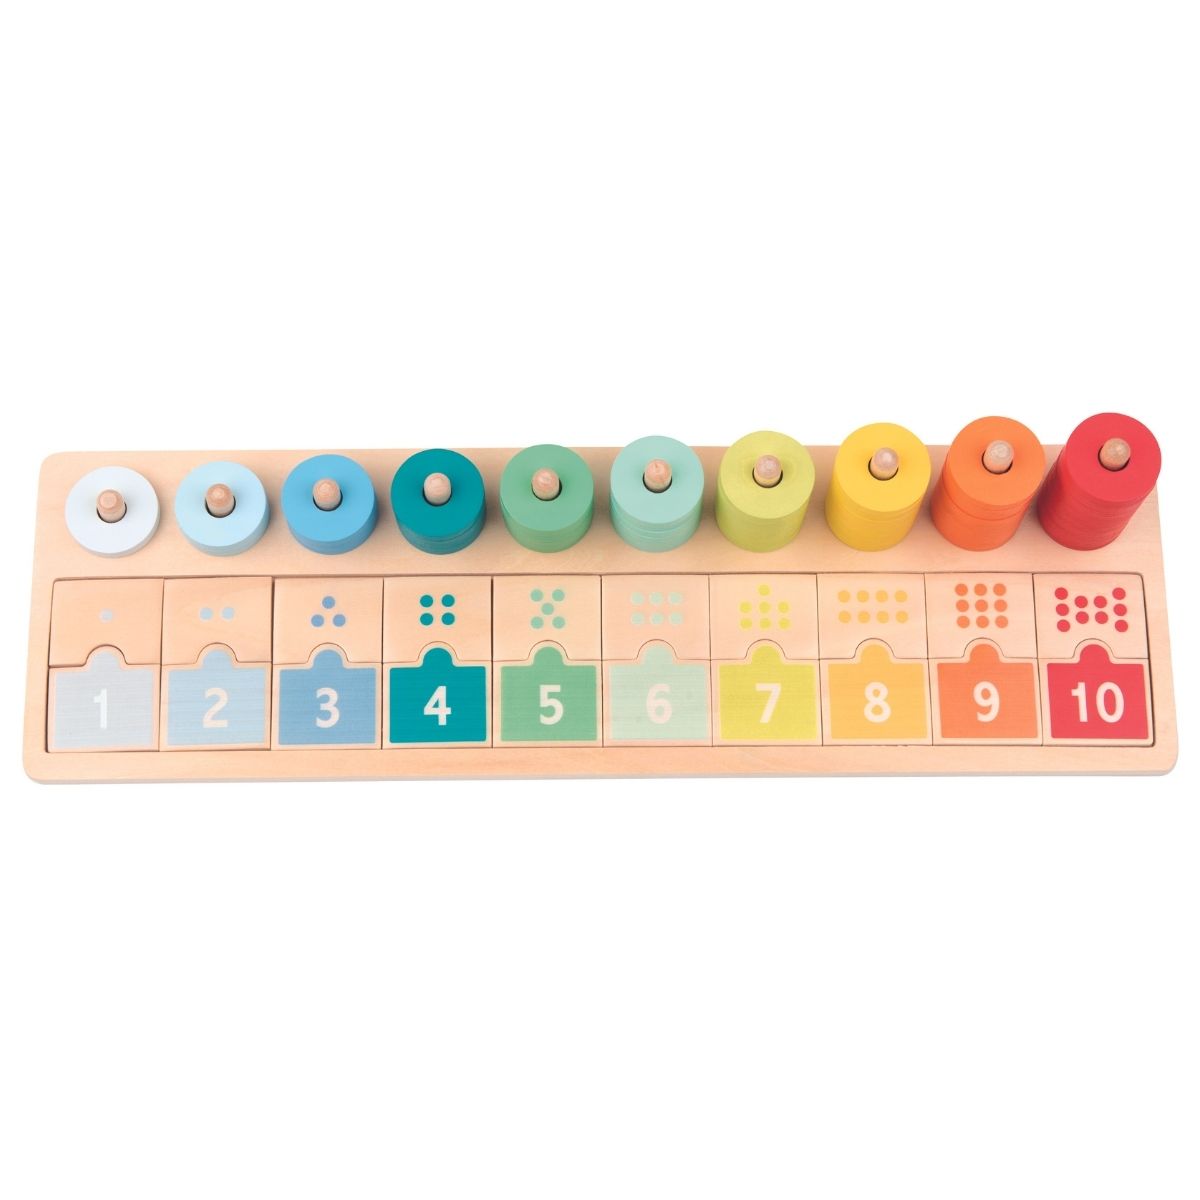 Lelin 1-10 Counting and Matching Board